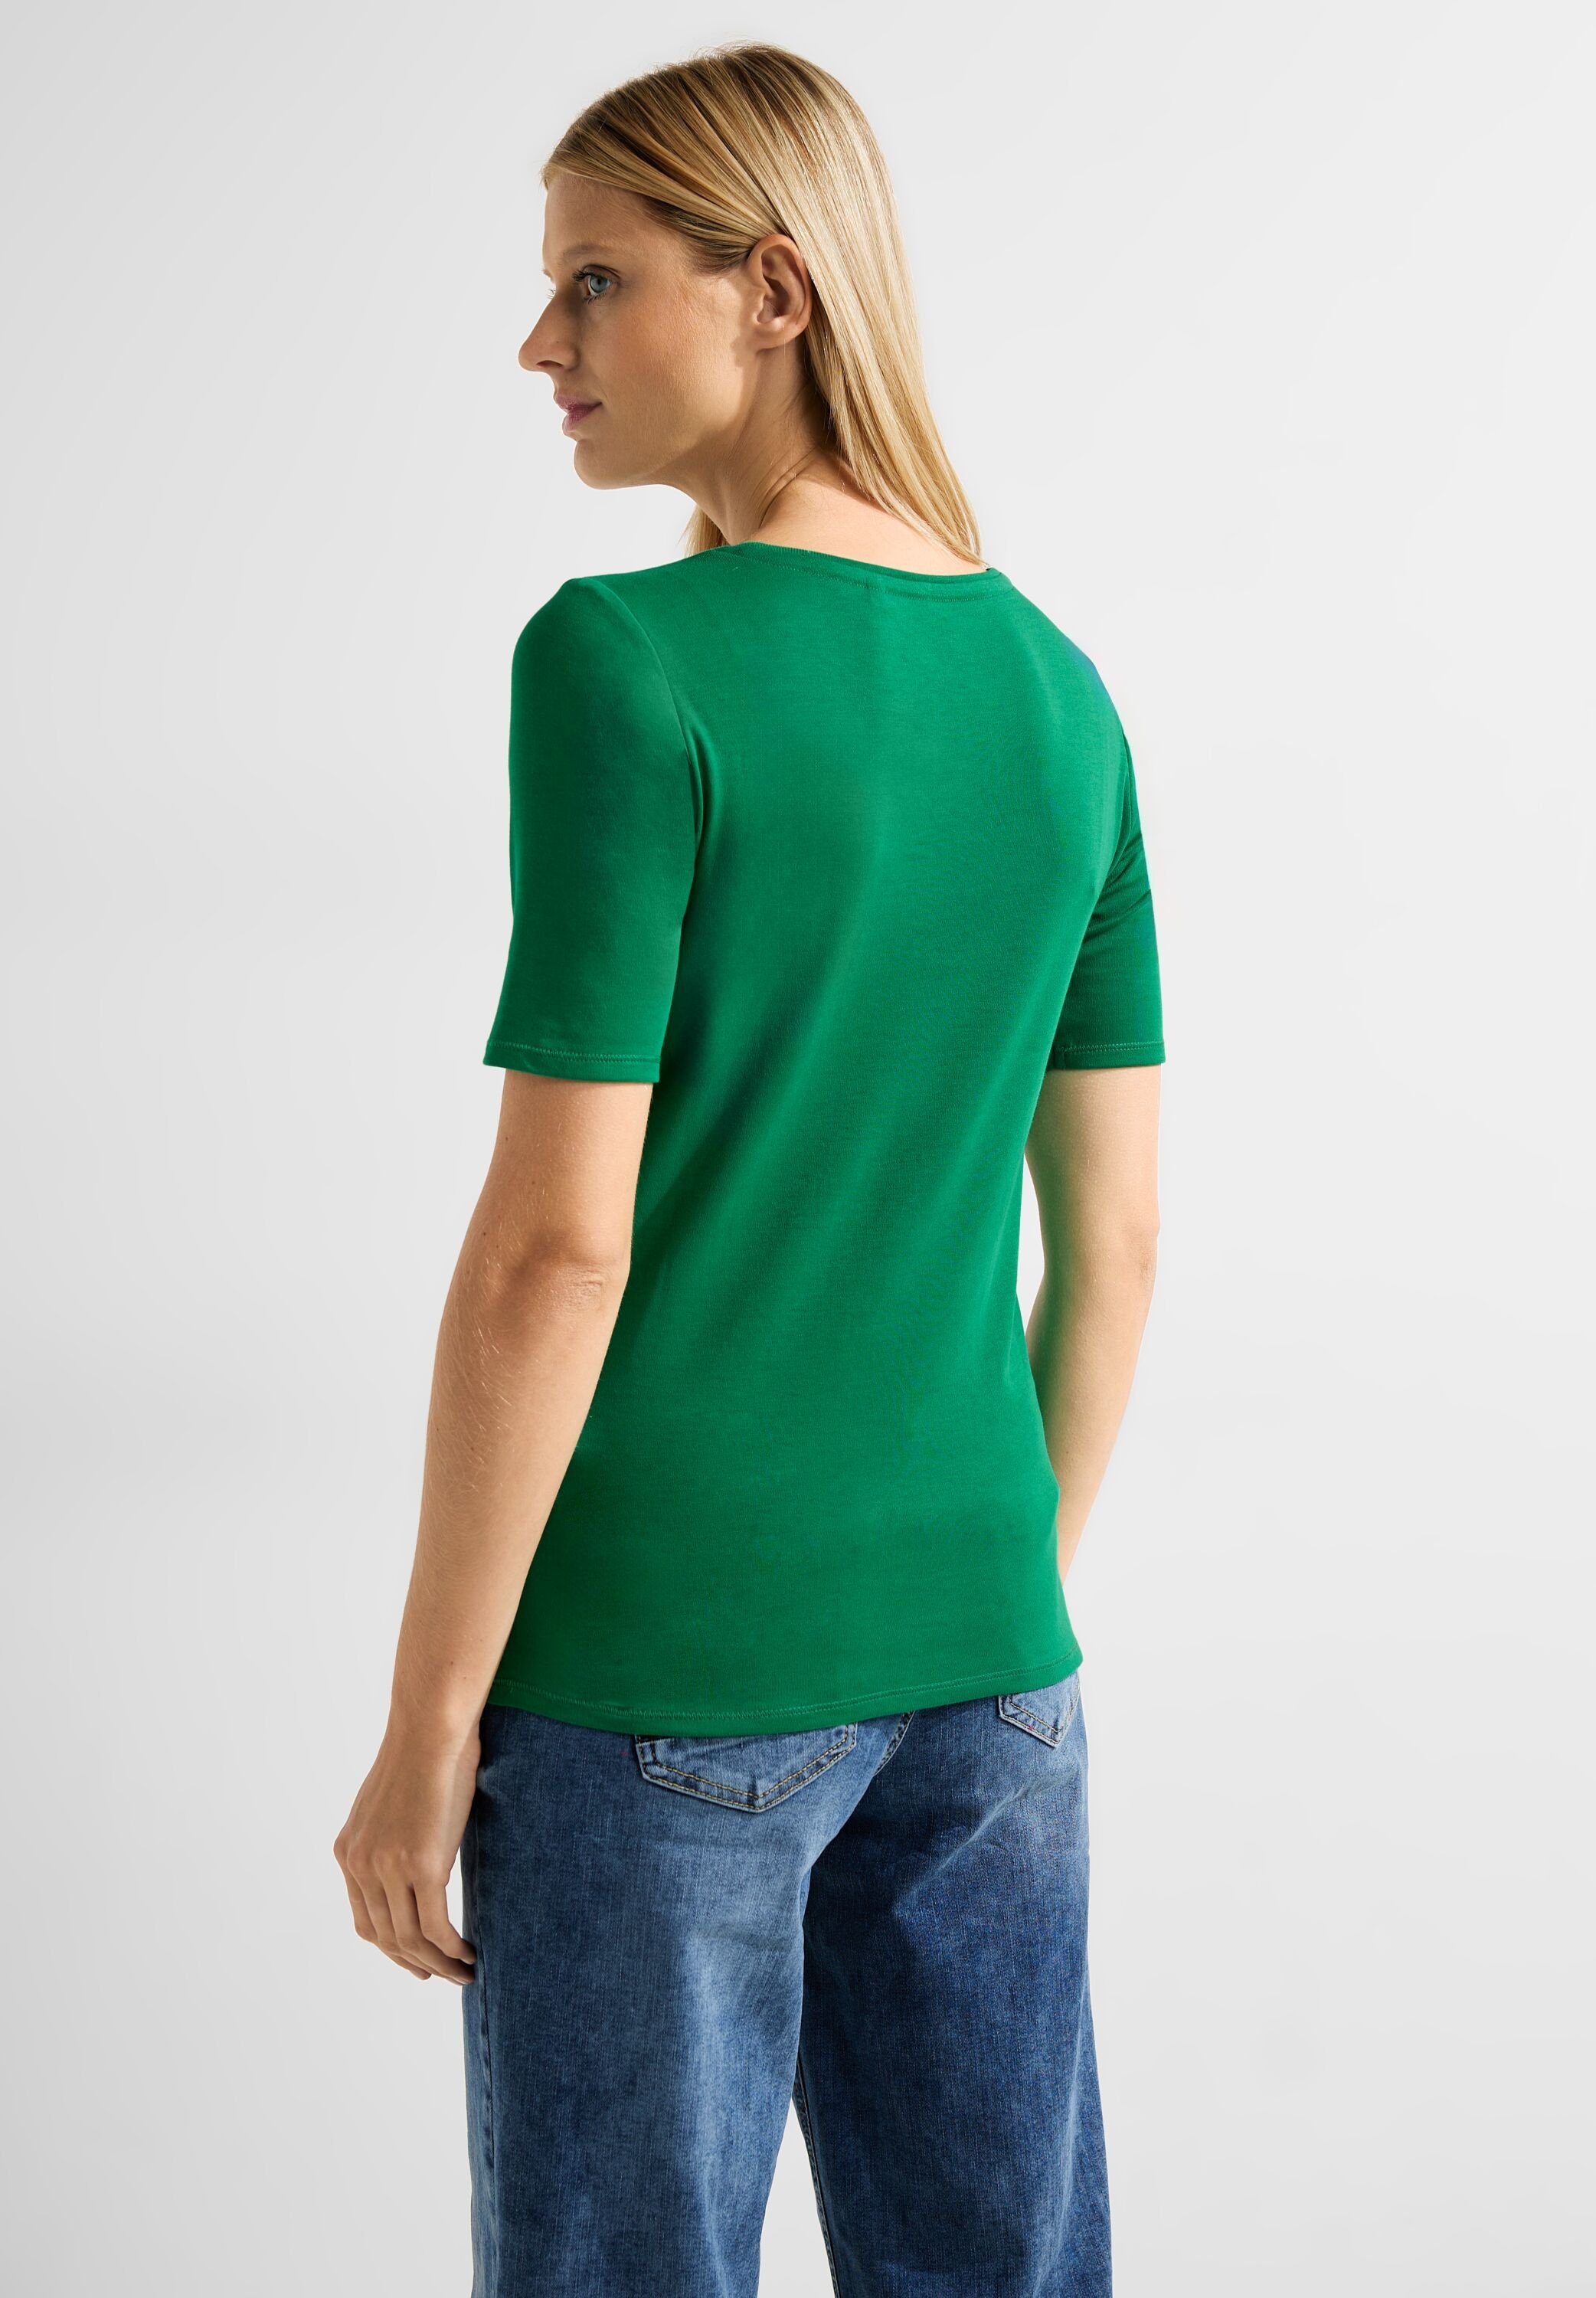 green in Unifarbe Cecil T-Shirt easy